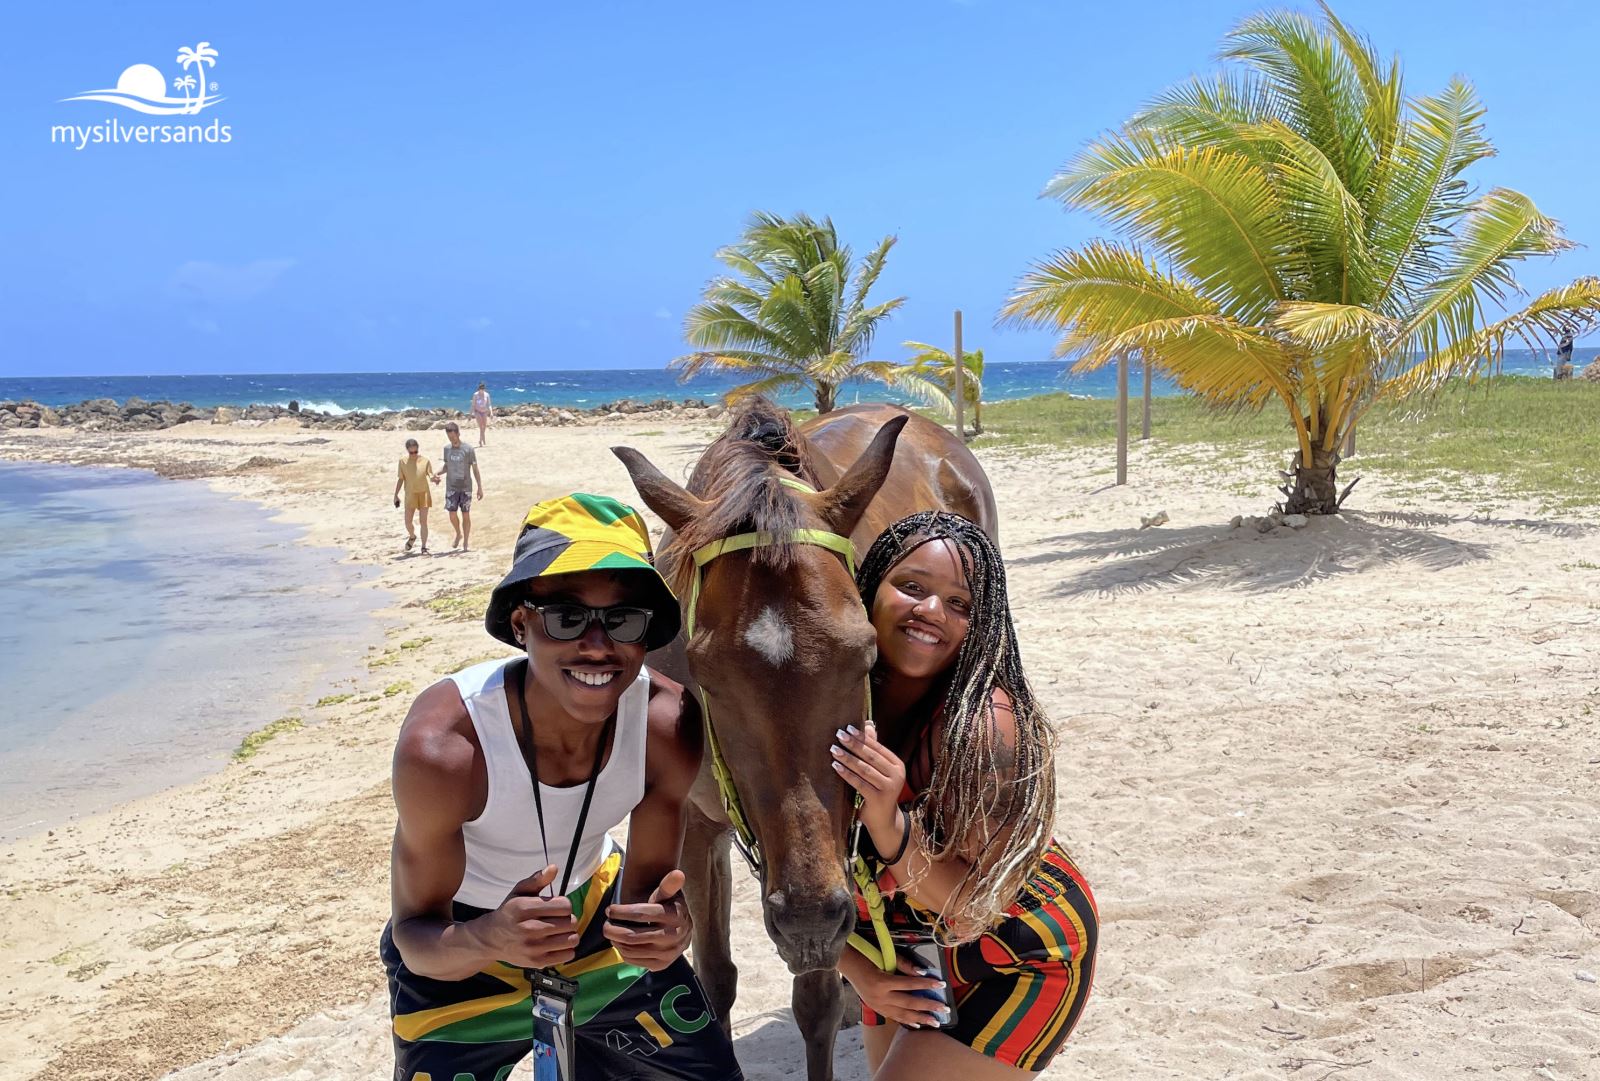 man and woman on the beach posing with horse